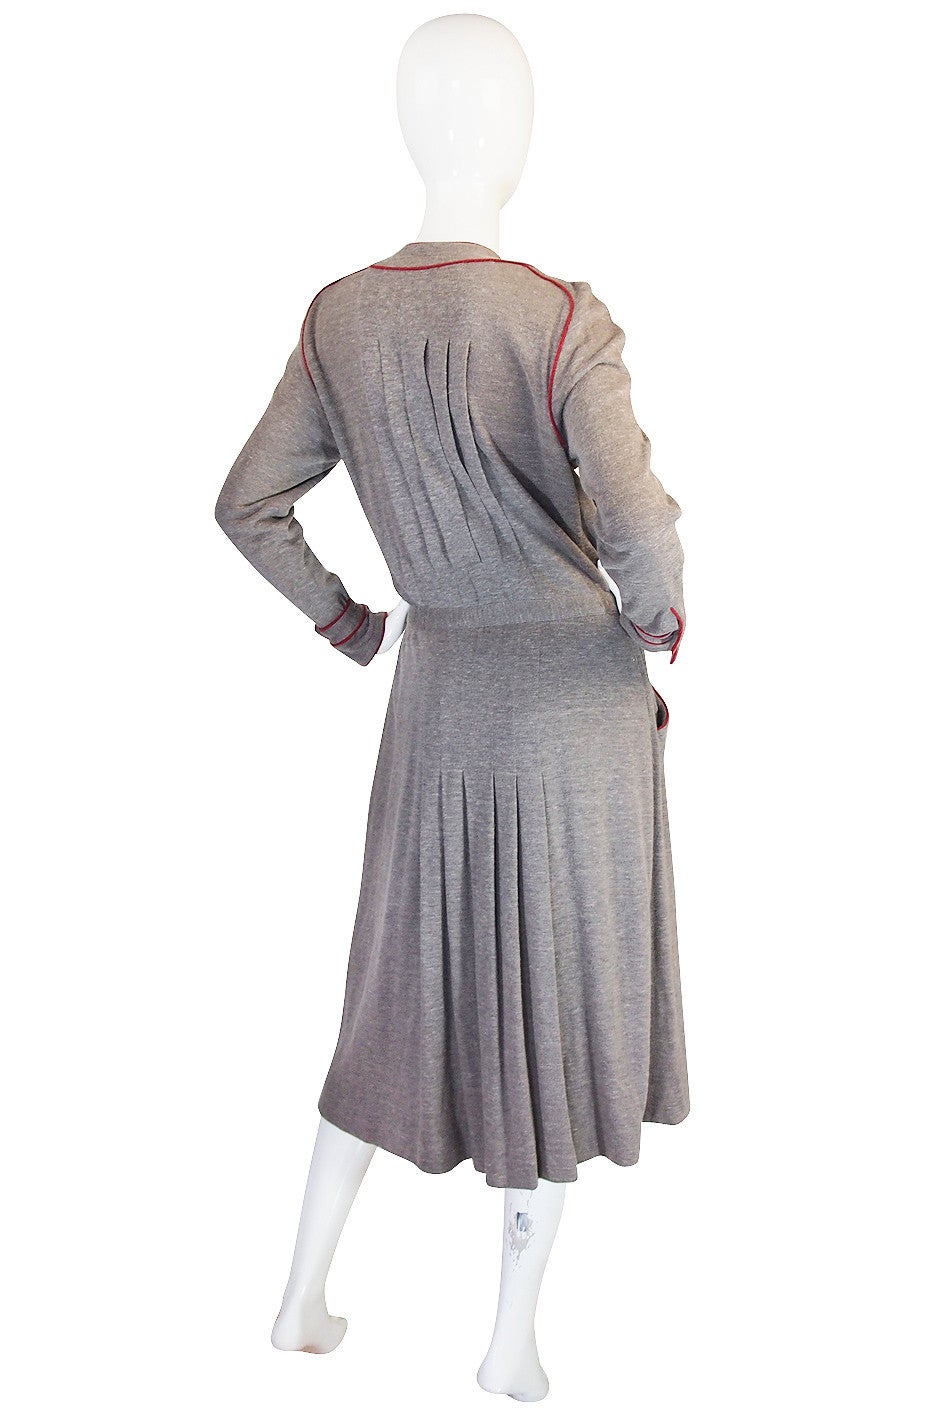 This is the kind of dress that Chanel excels at with its understated elegance and beautiful lines. The fabric is a soft grey and has an almost subtle angora feel to it but it is actually a combination of wool and silk thread and I imagine it is a